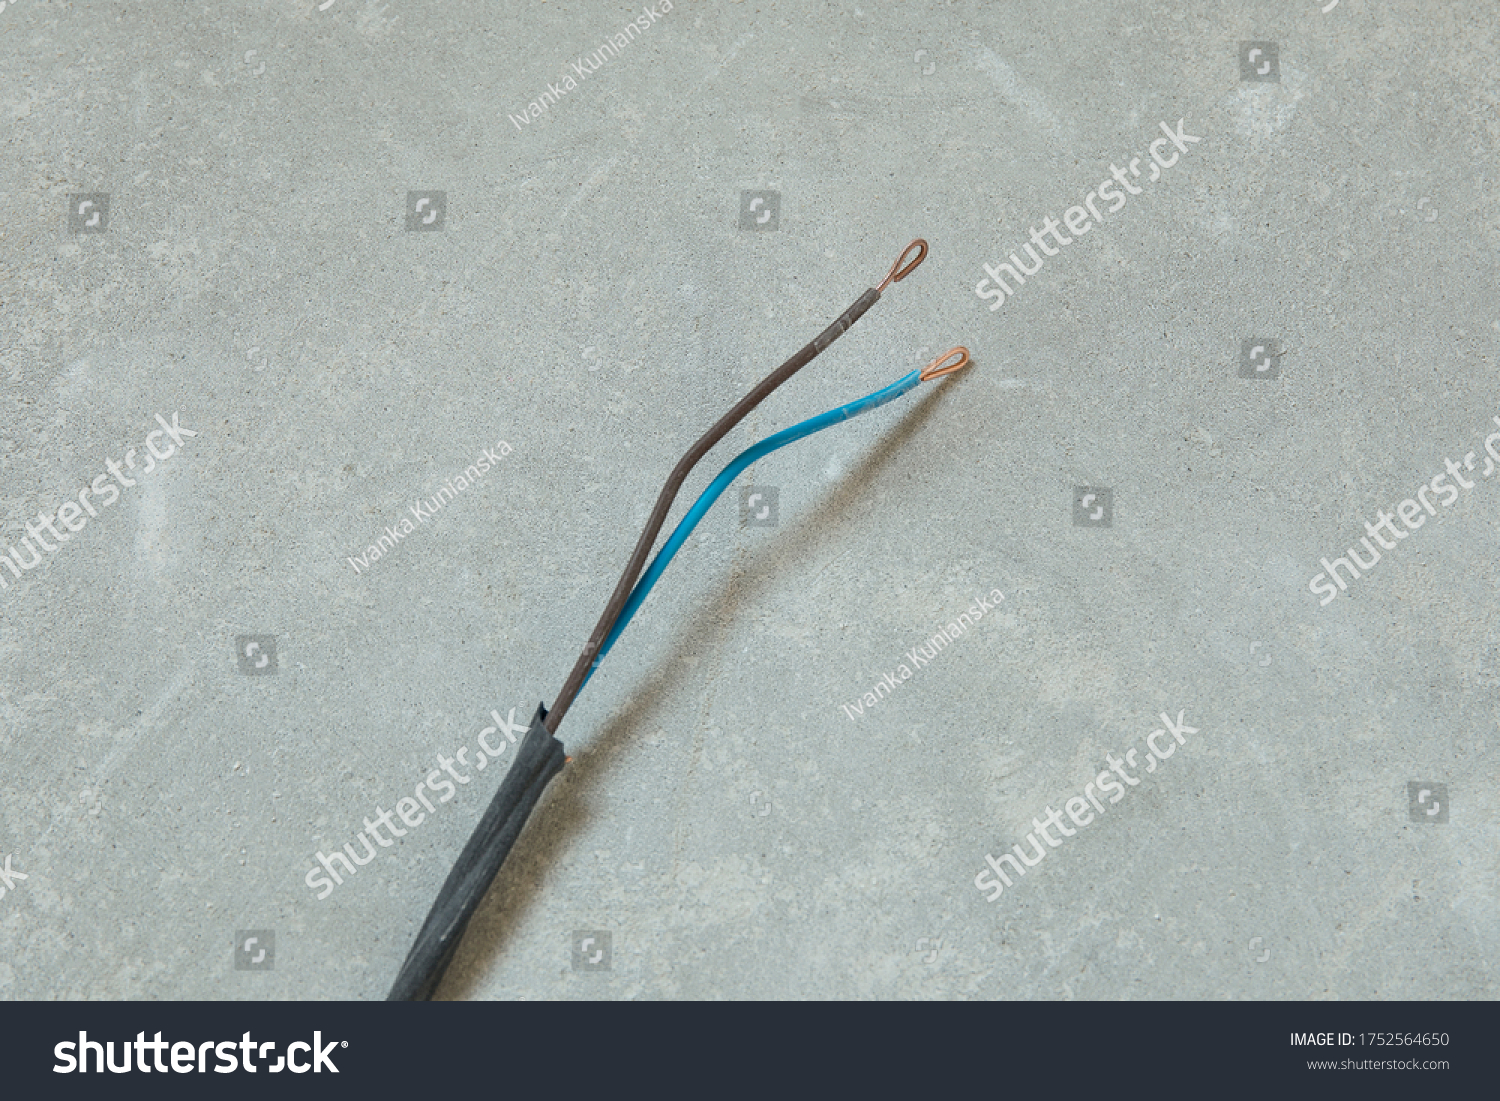 Naked Wires Images Stock Photos Vectors Shutterstock